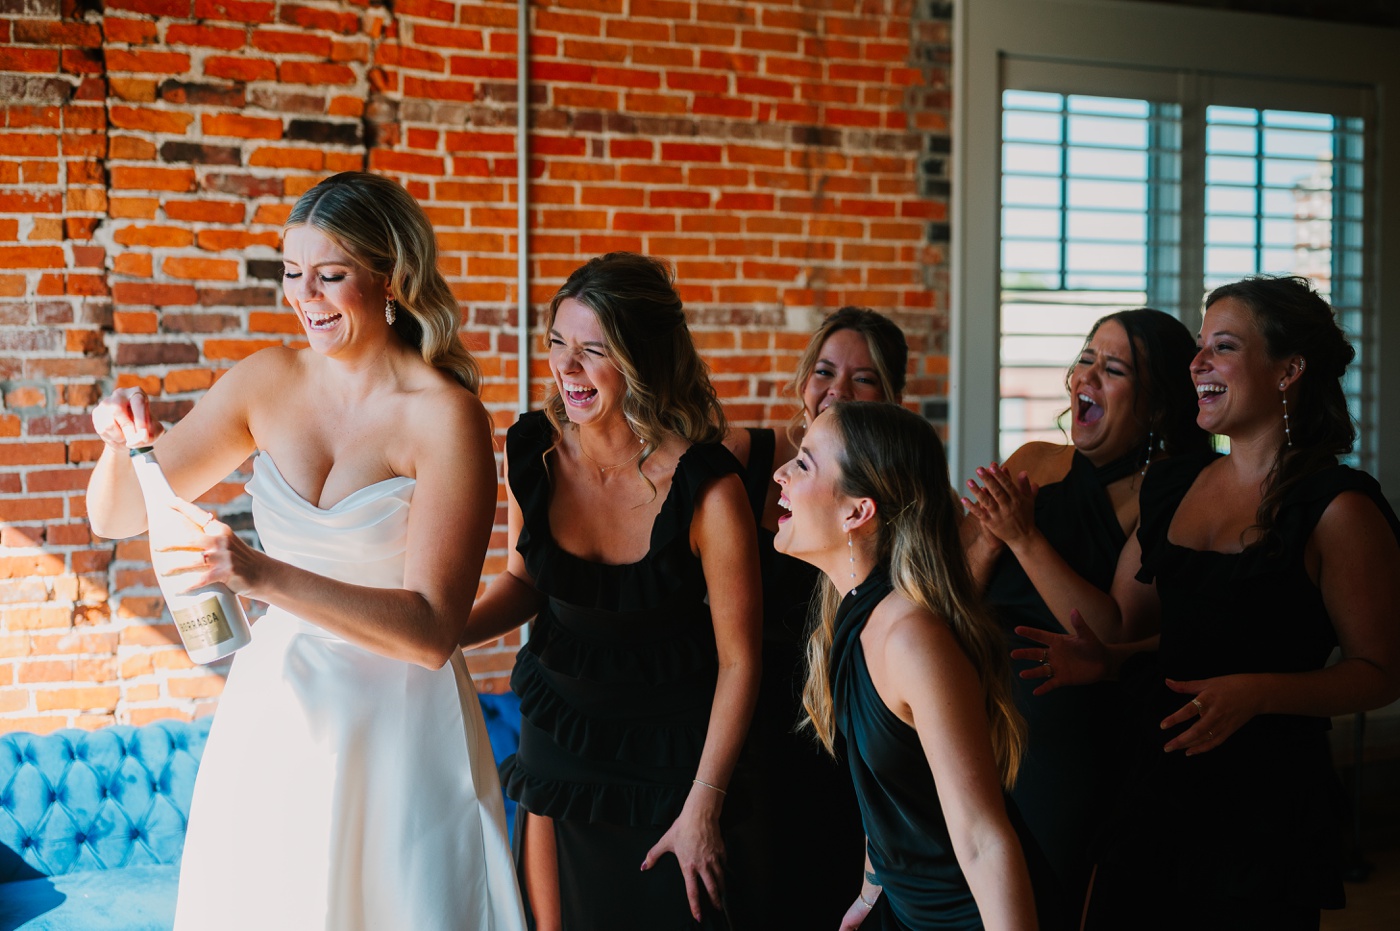 Bride opening a bottle of champagne with her bridesmaids laughing behind her